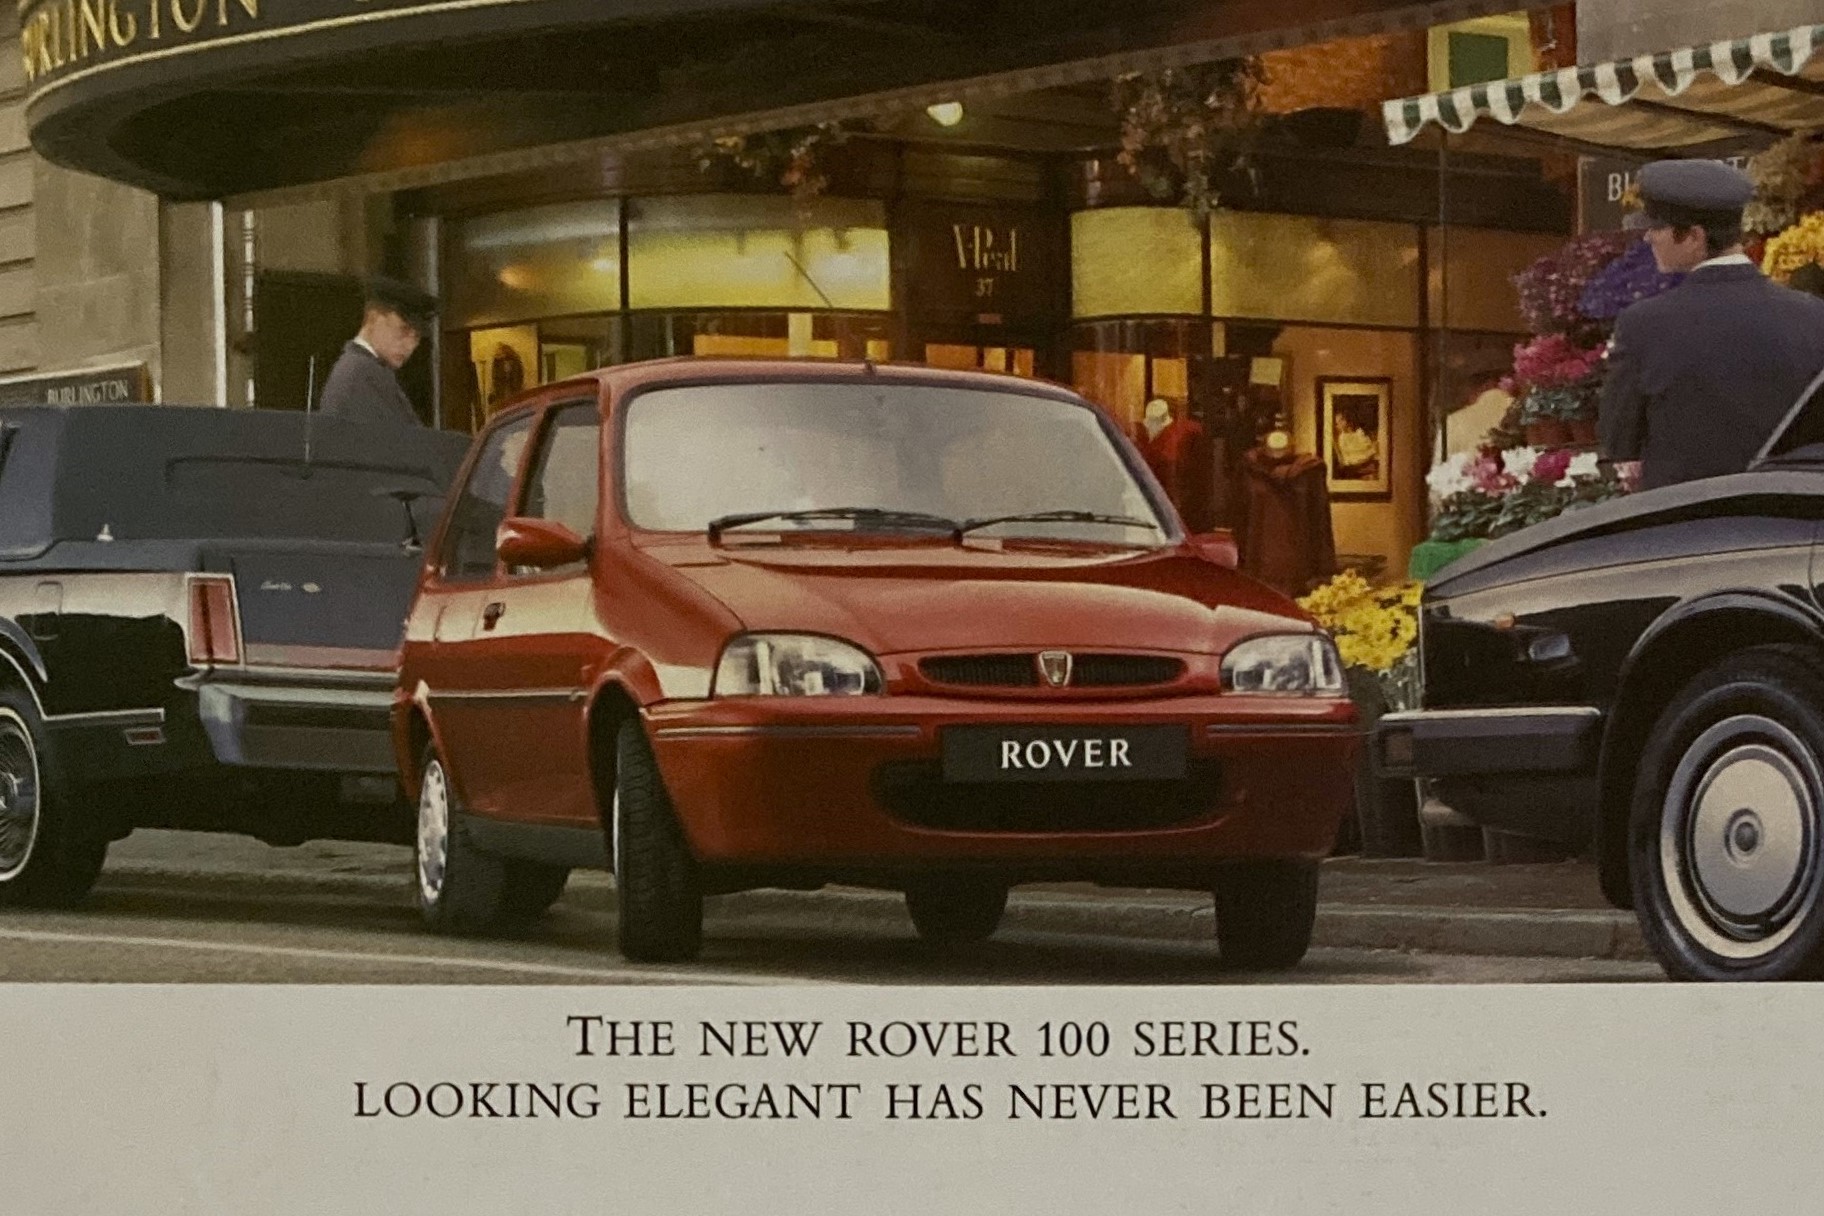 Ad Break: The Rover 100 was a limo in miniature